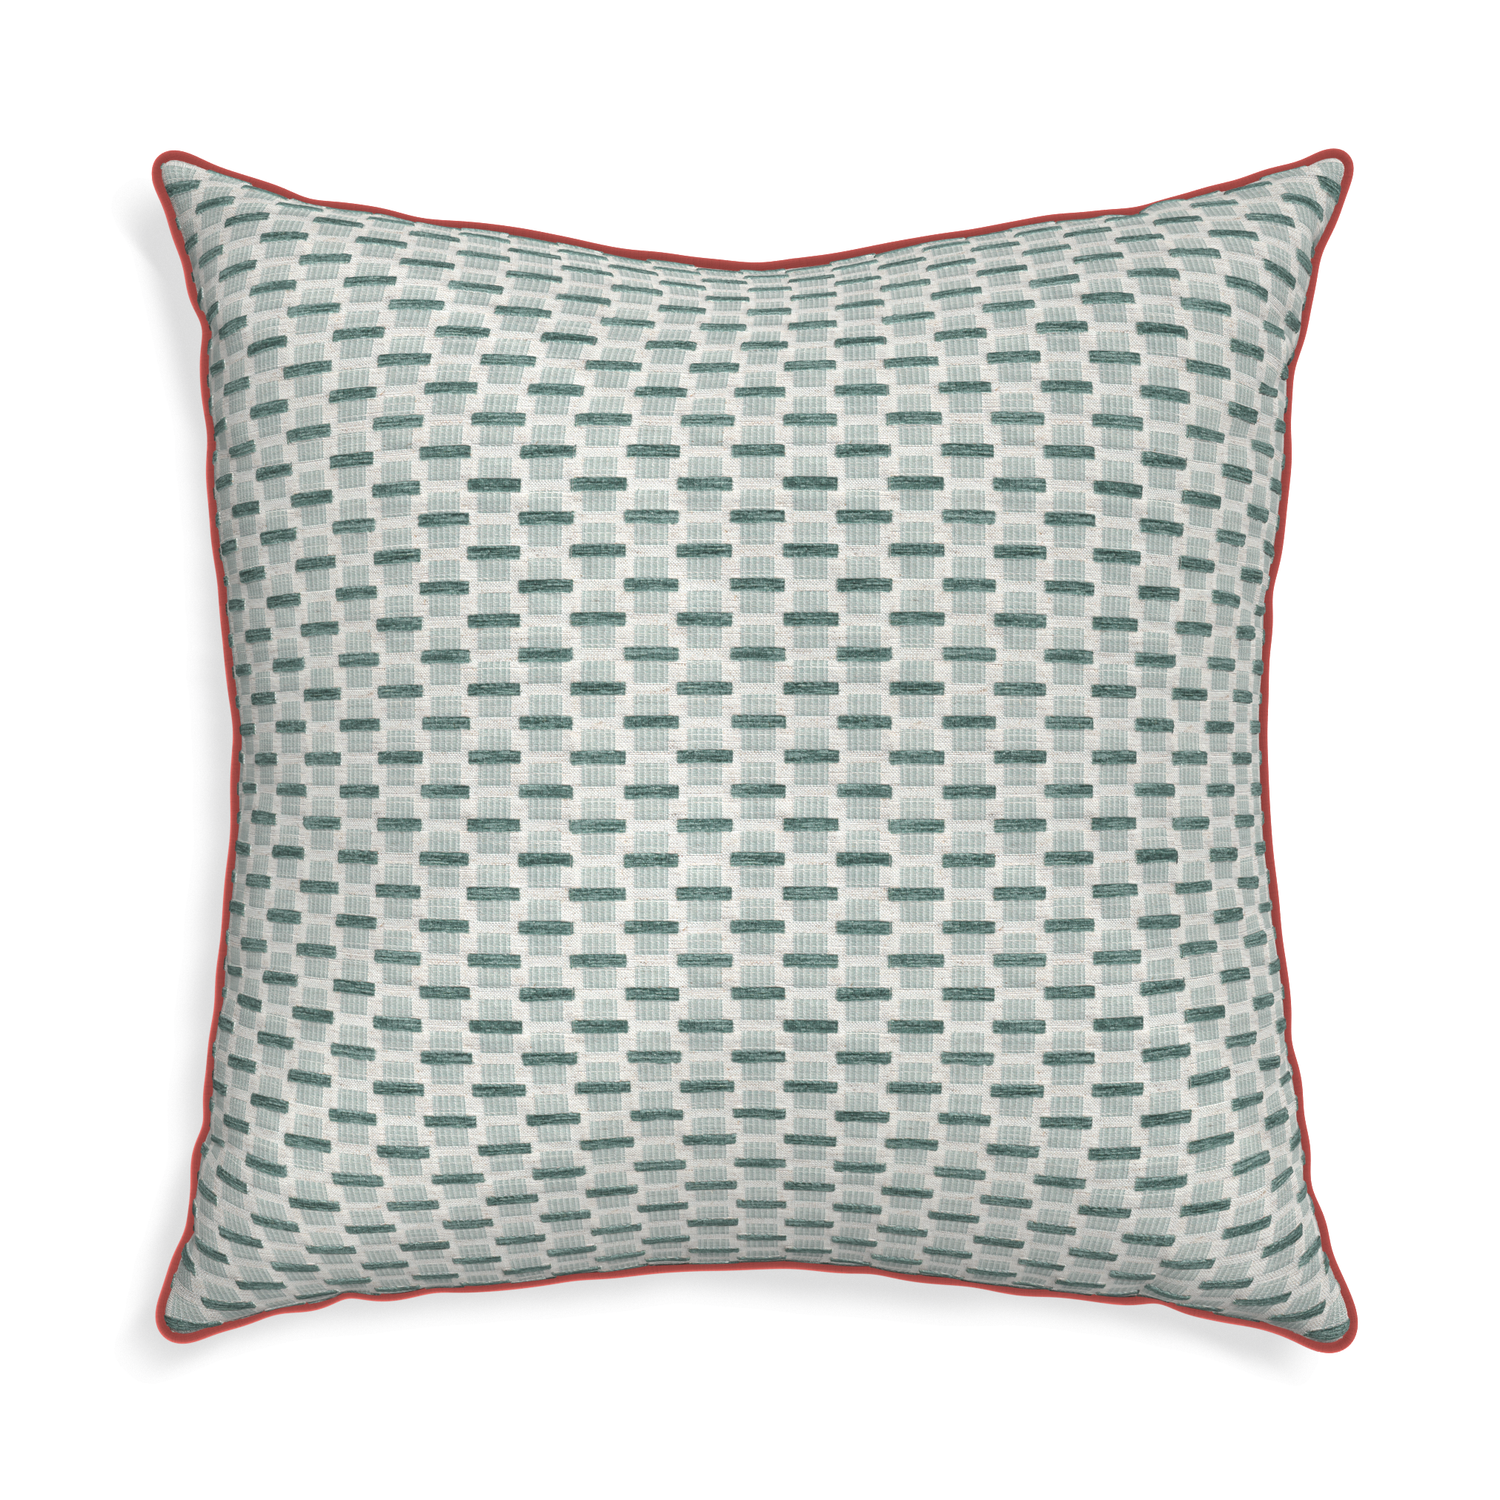 Euro-sham willow mint custom green geometric chenillepillow with c piping on white background